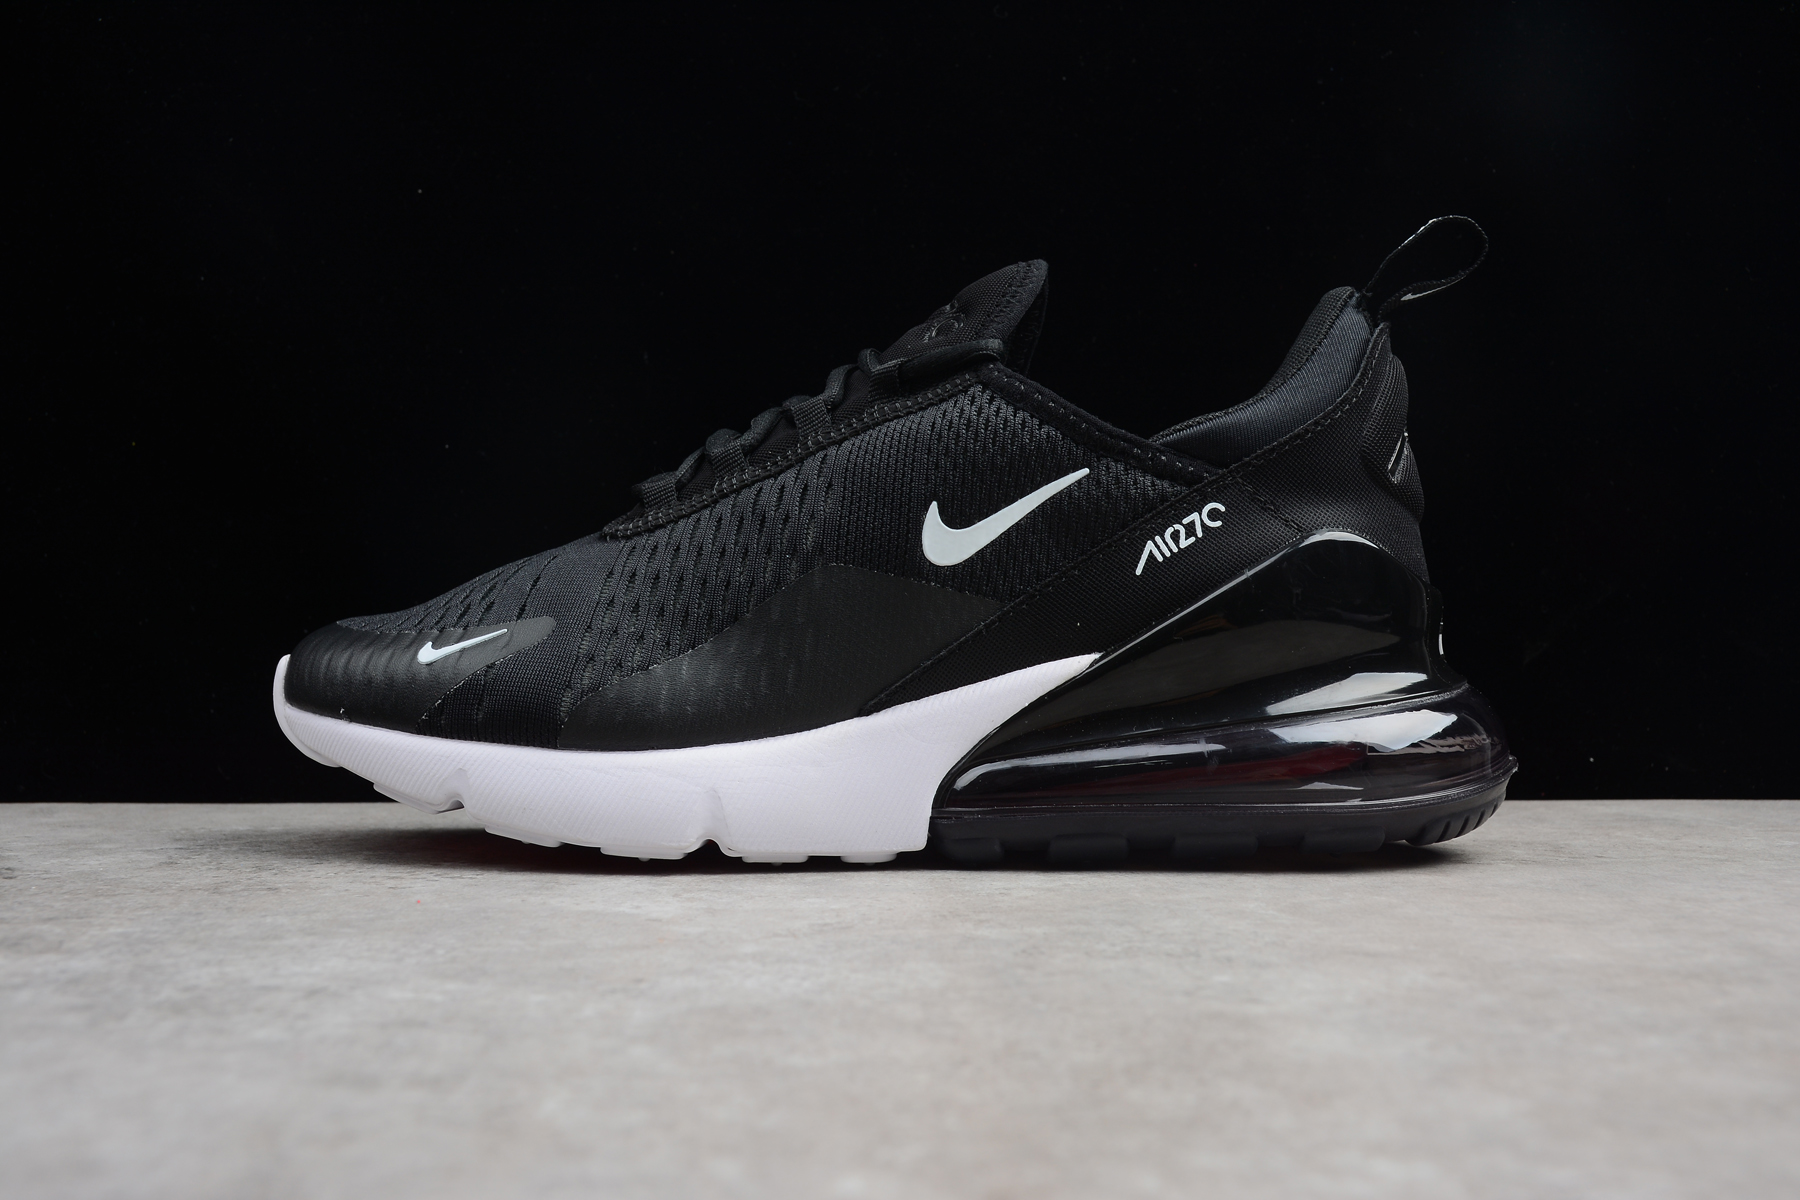 Nike Air Max 270 "Black/White" AH8050-002 Men's and Women's Size For Sale